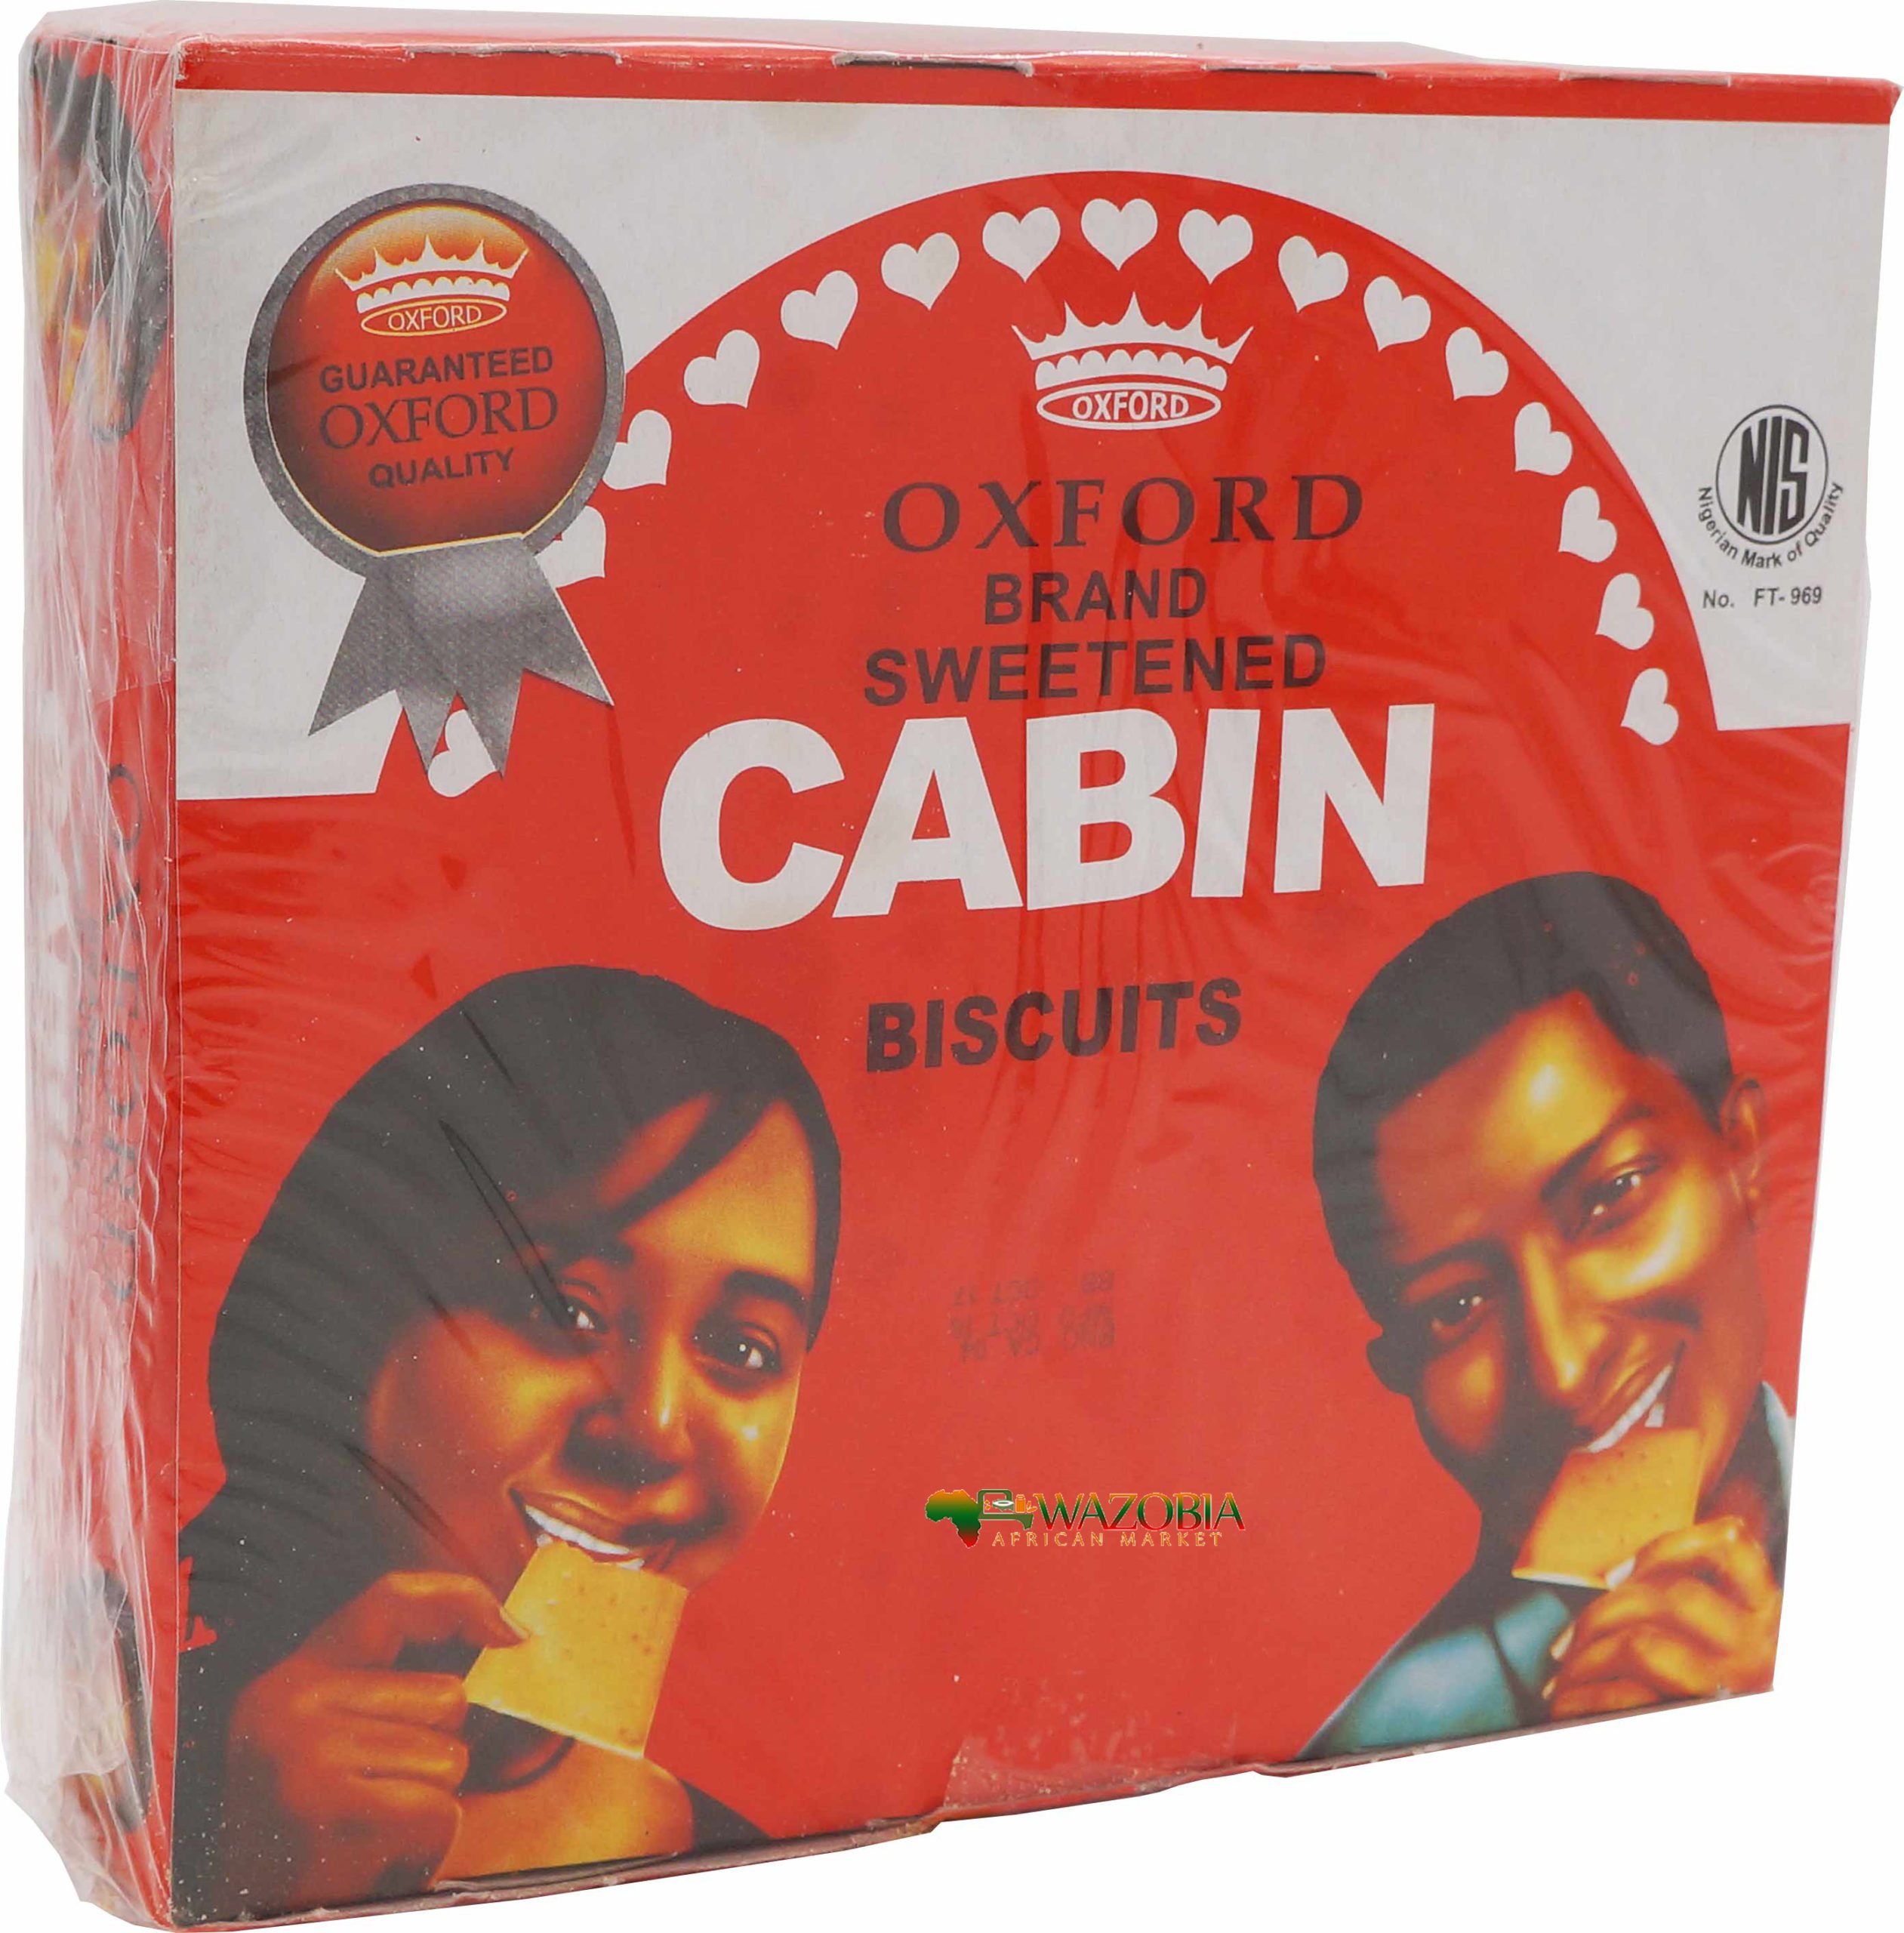 Oxford Cabin Biscuits (1 pack)